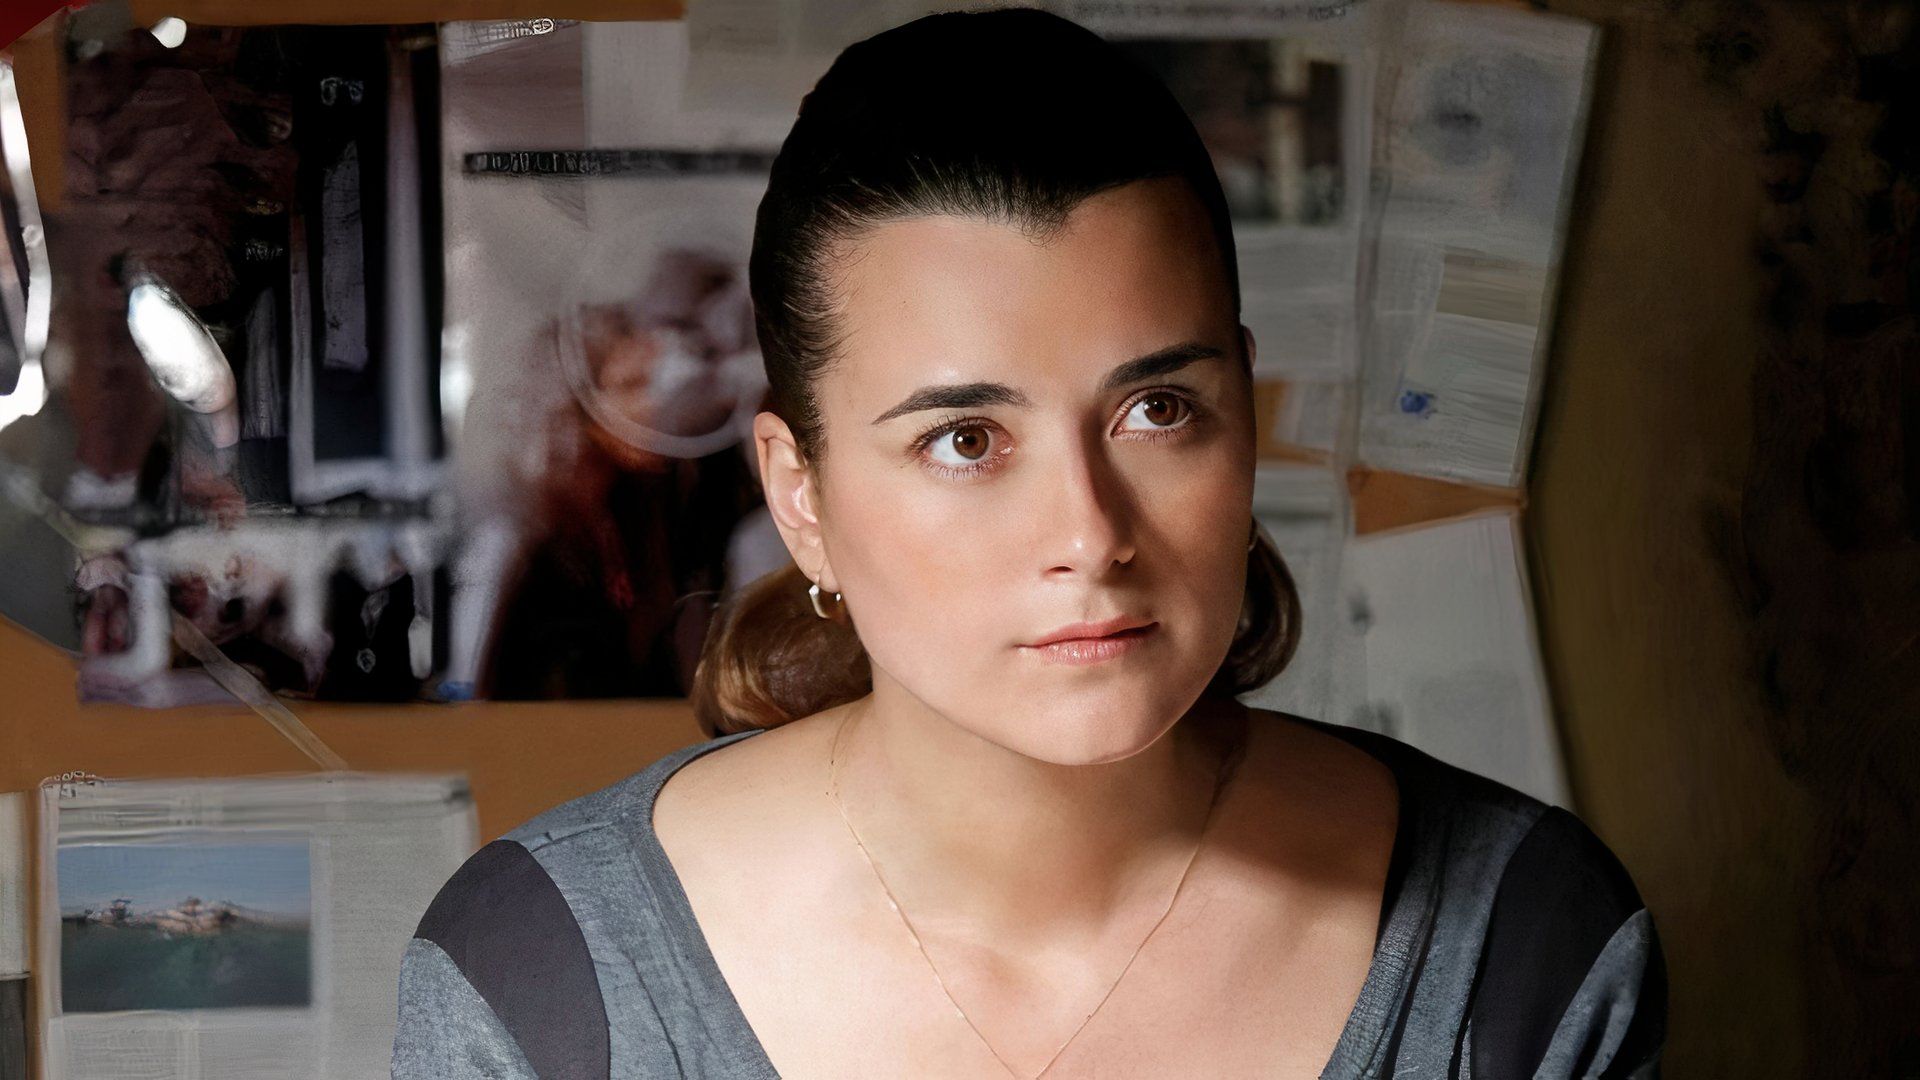 Cote de Pablo as Ziva David sitting at a desk with papers hung up behind her in NCIS (1)